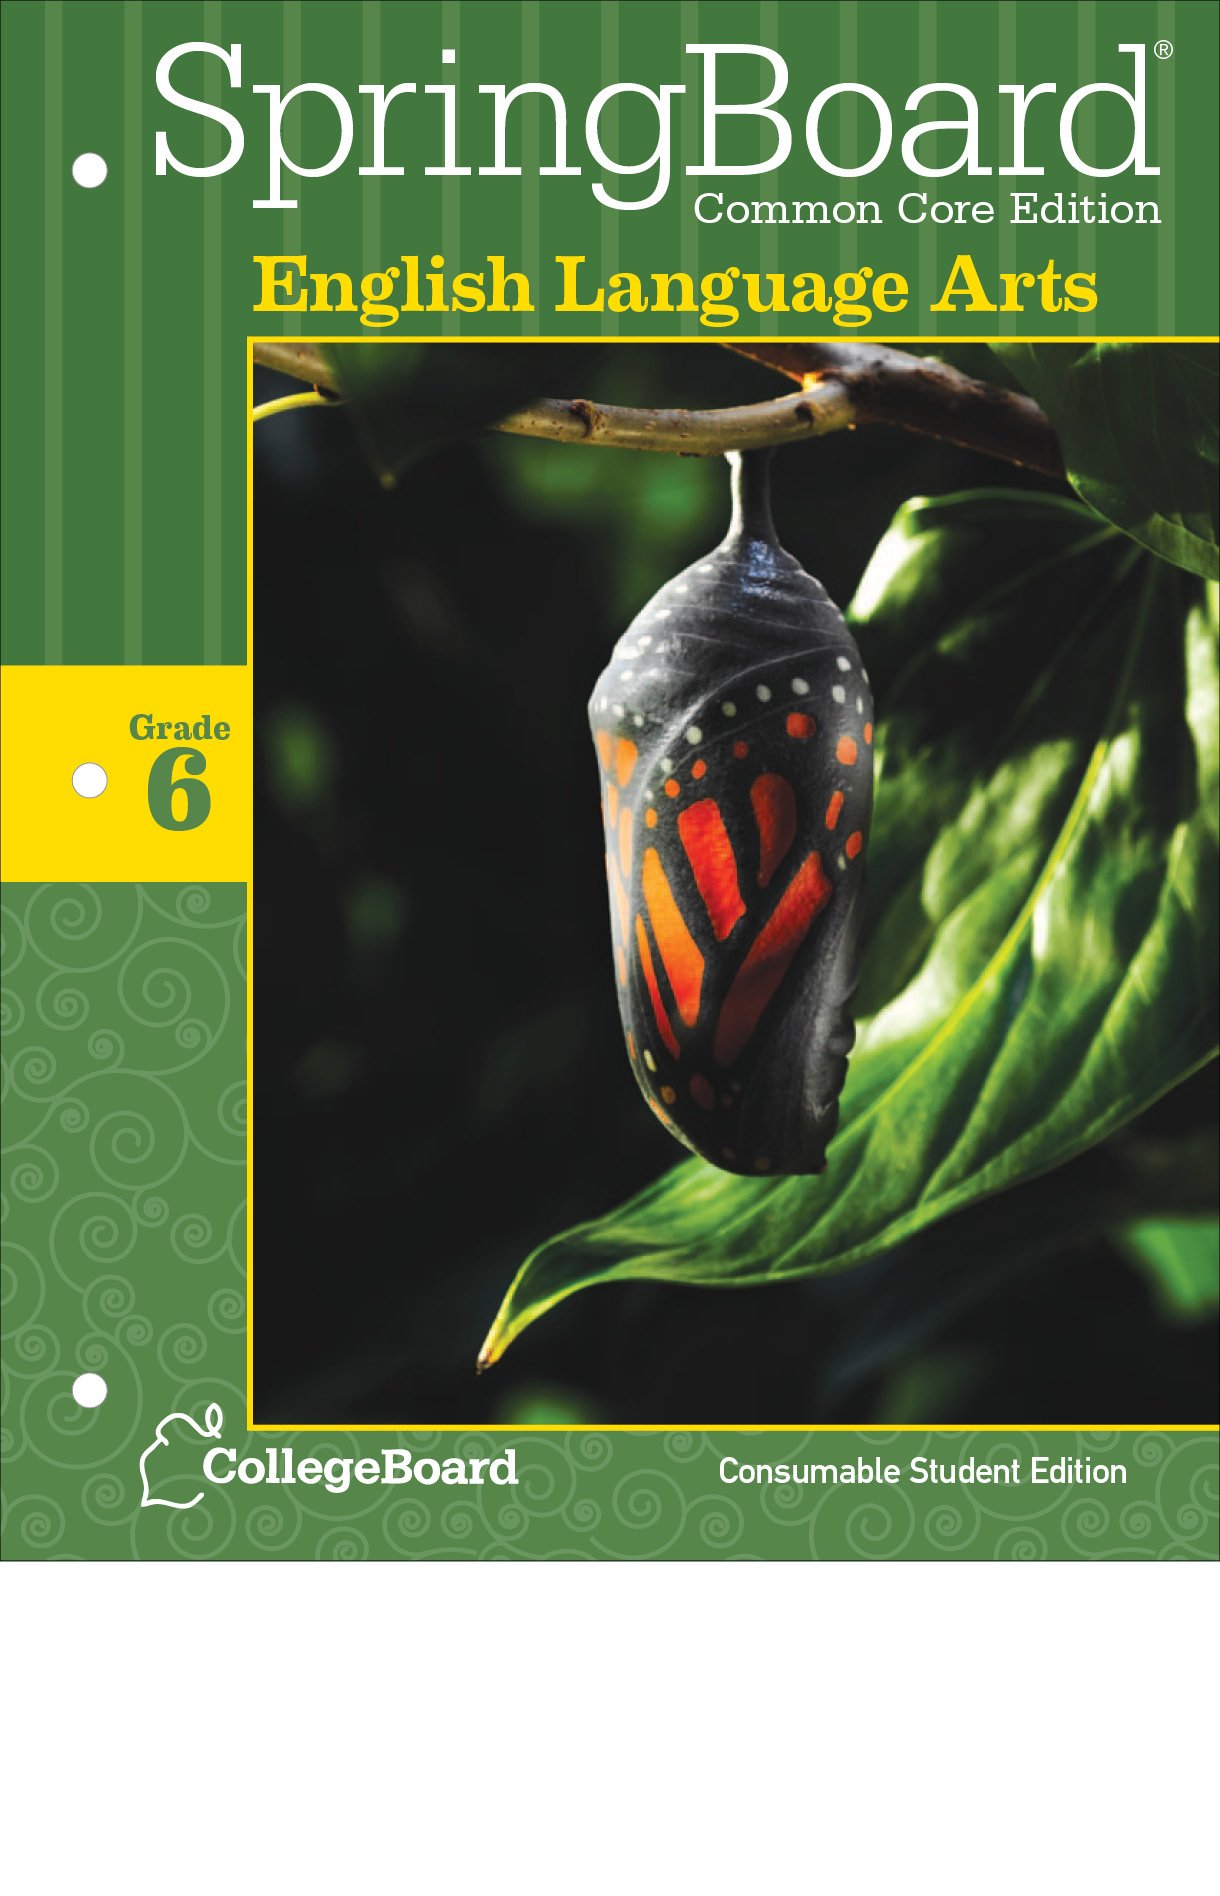 Book cover for CollegeBoard's SpringBoard English Language Arts, Common Core Student Edition. It has a hatching butterfly hanging from a branch.